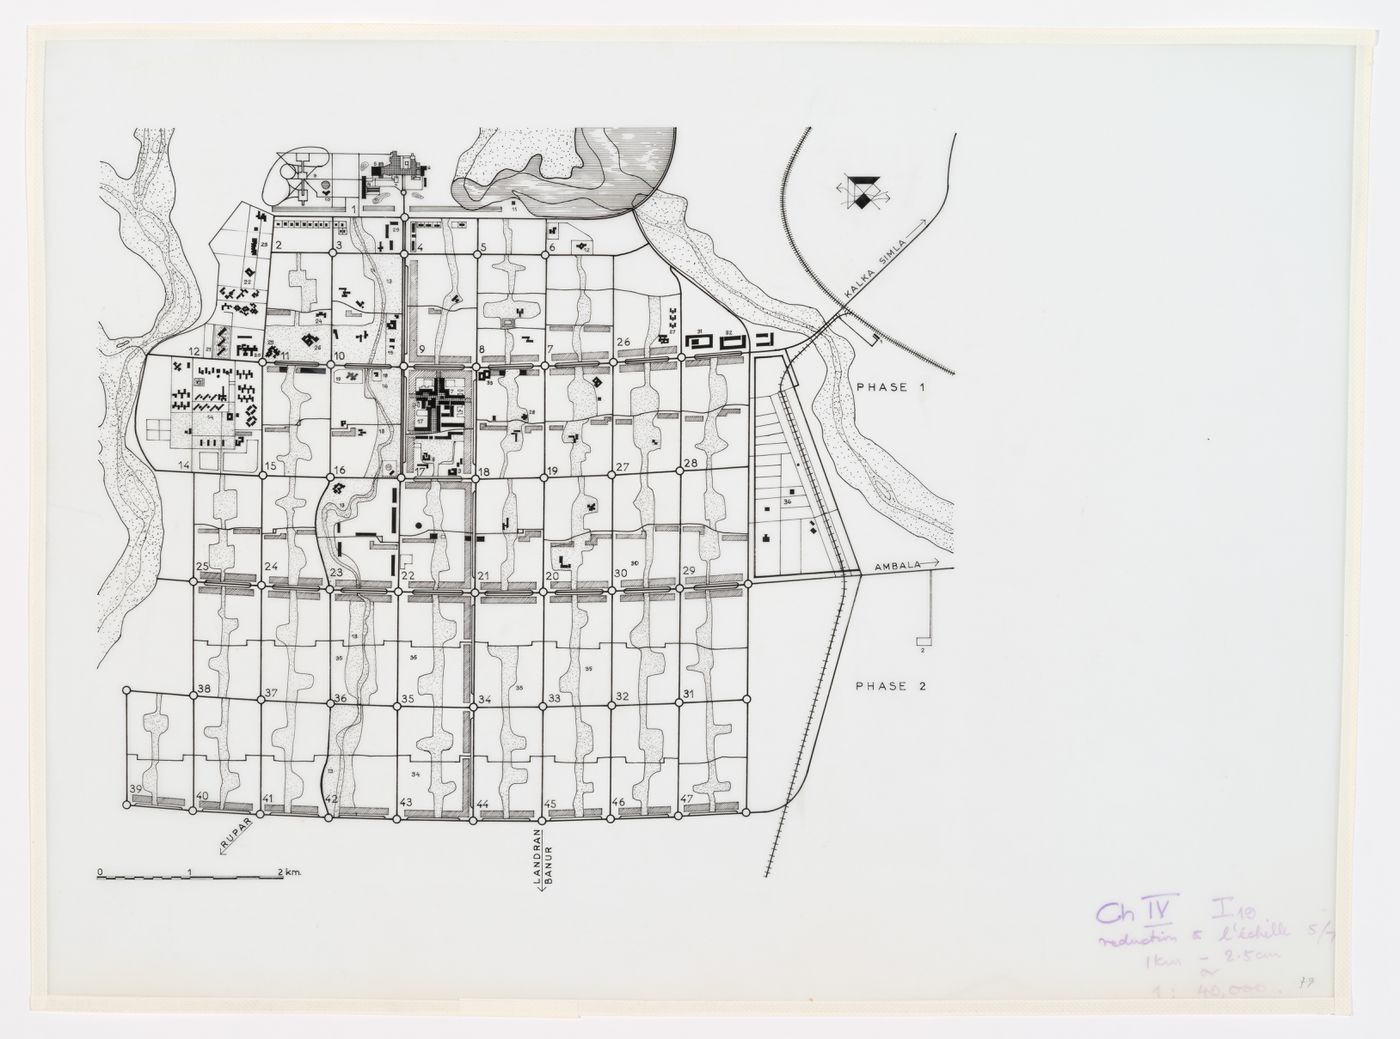 Layout plan for Chandigarh, India